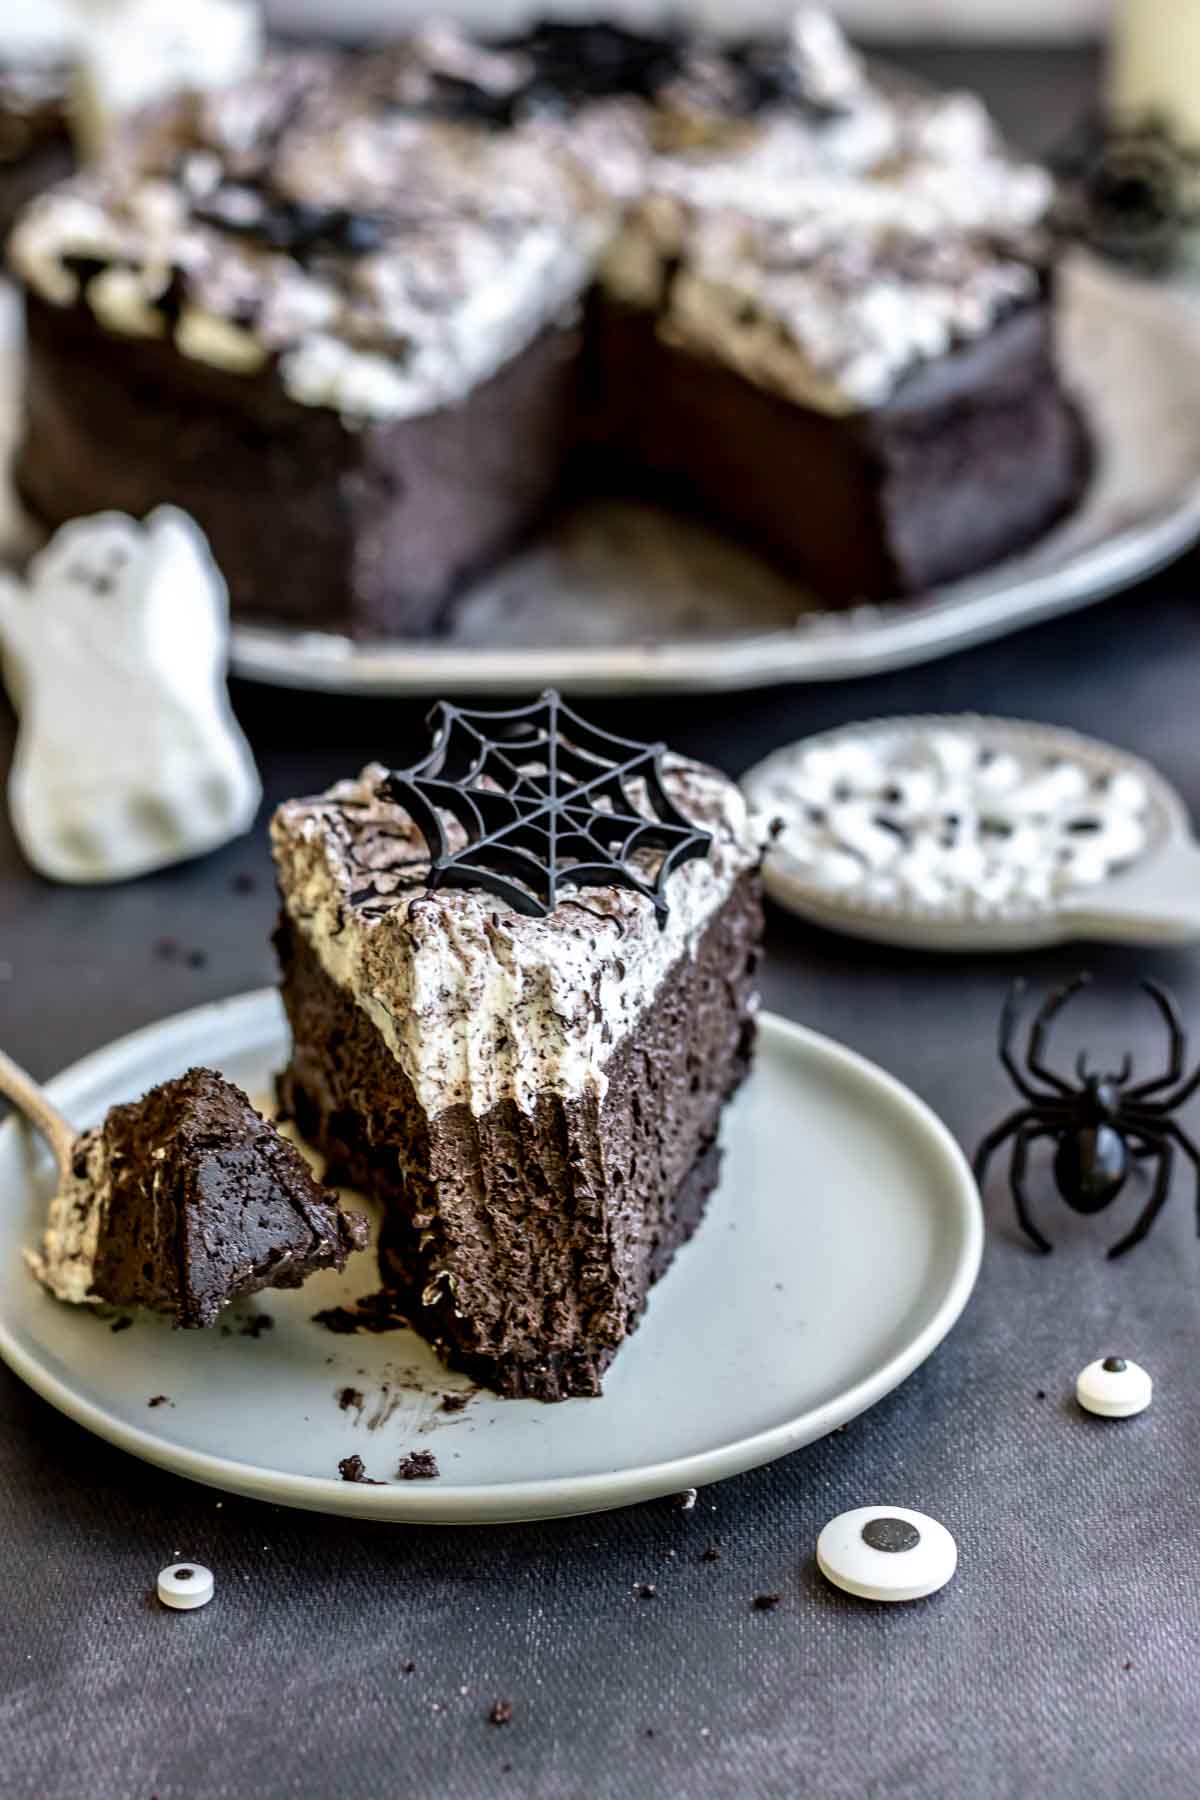 A slice of halloween cheesecake on a plate with a fork having a bite removed.